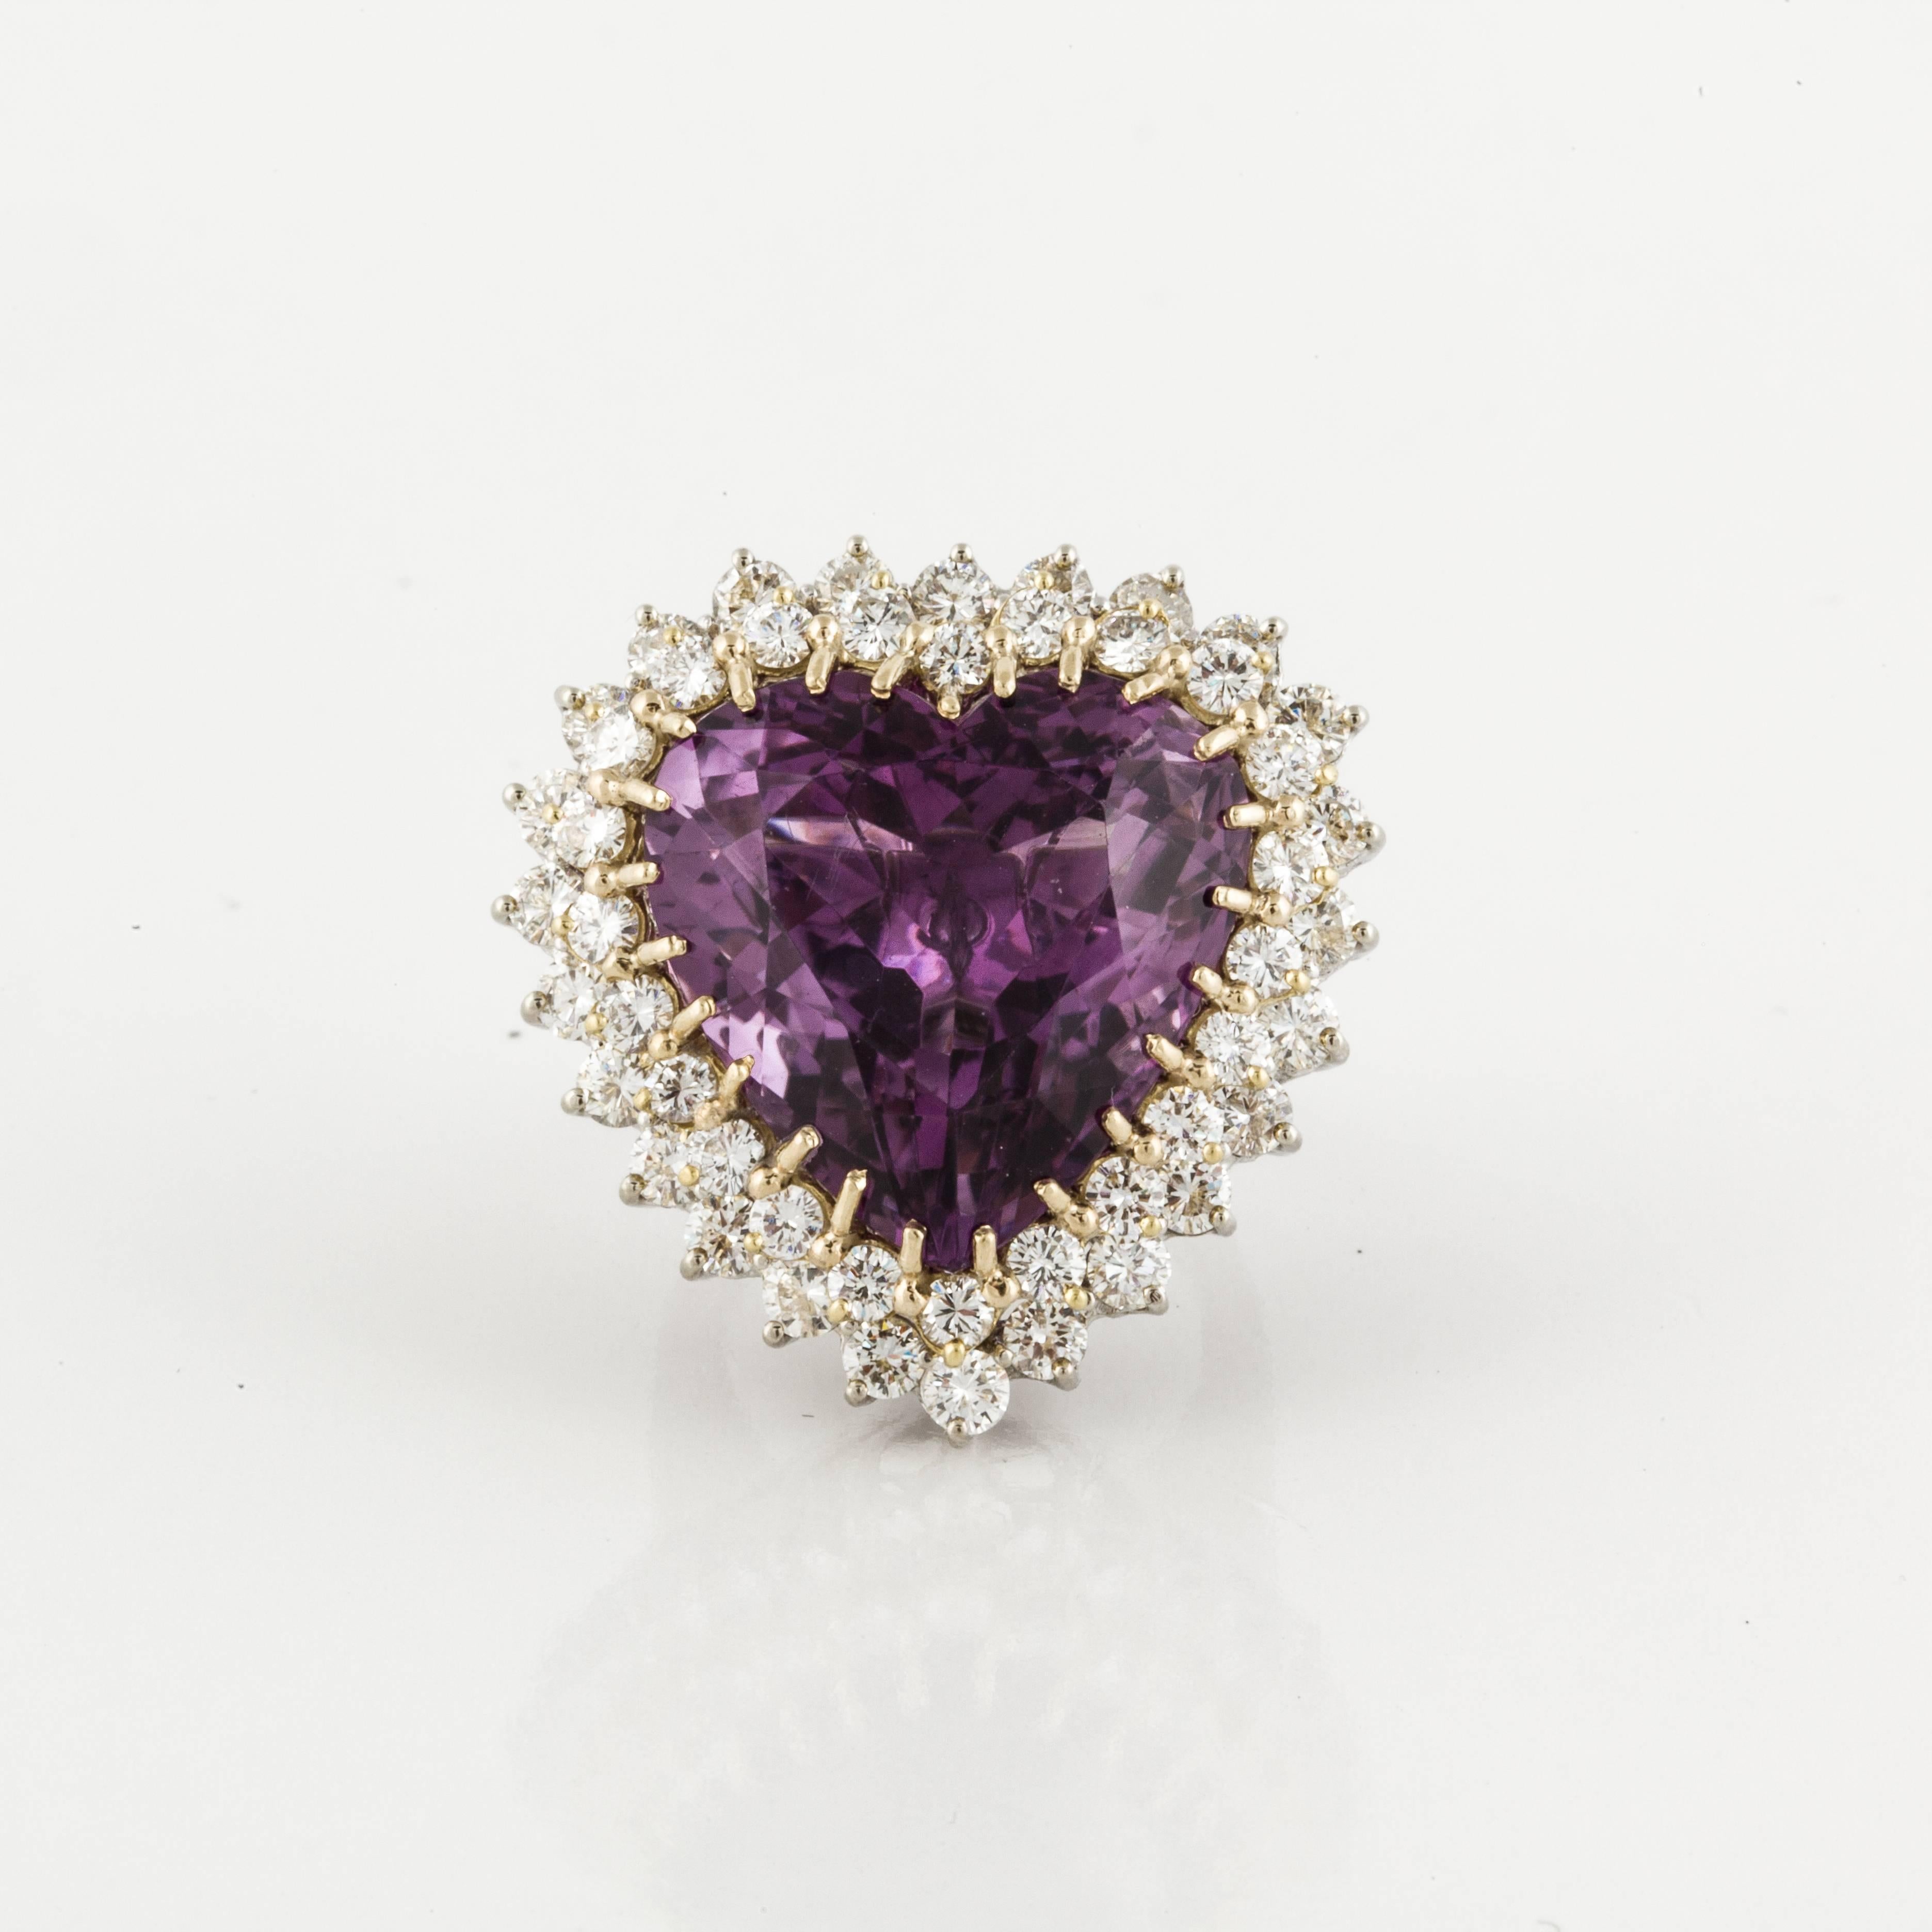 Ringdant which can be worn as a ring or pendant, is composed of 14K gold featuring a heart-shaped amethyst that totals 27 carats.  The amethyst is framed by a double row of 47 round diamonds that total 4.50 carats; G-I color and VS1-VS2 clarity. 